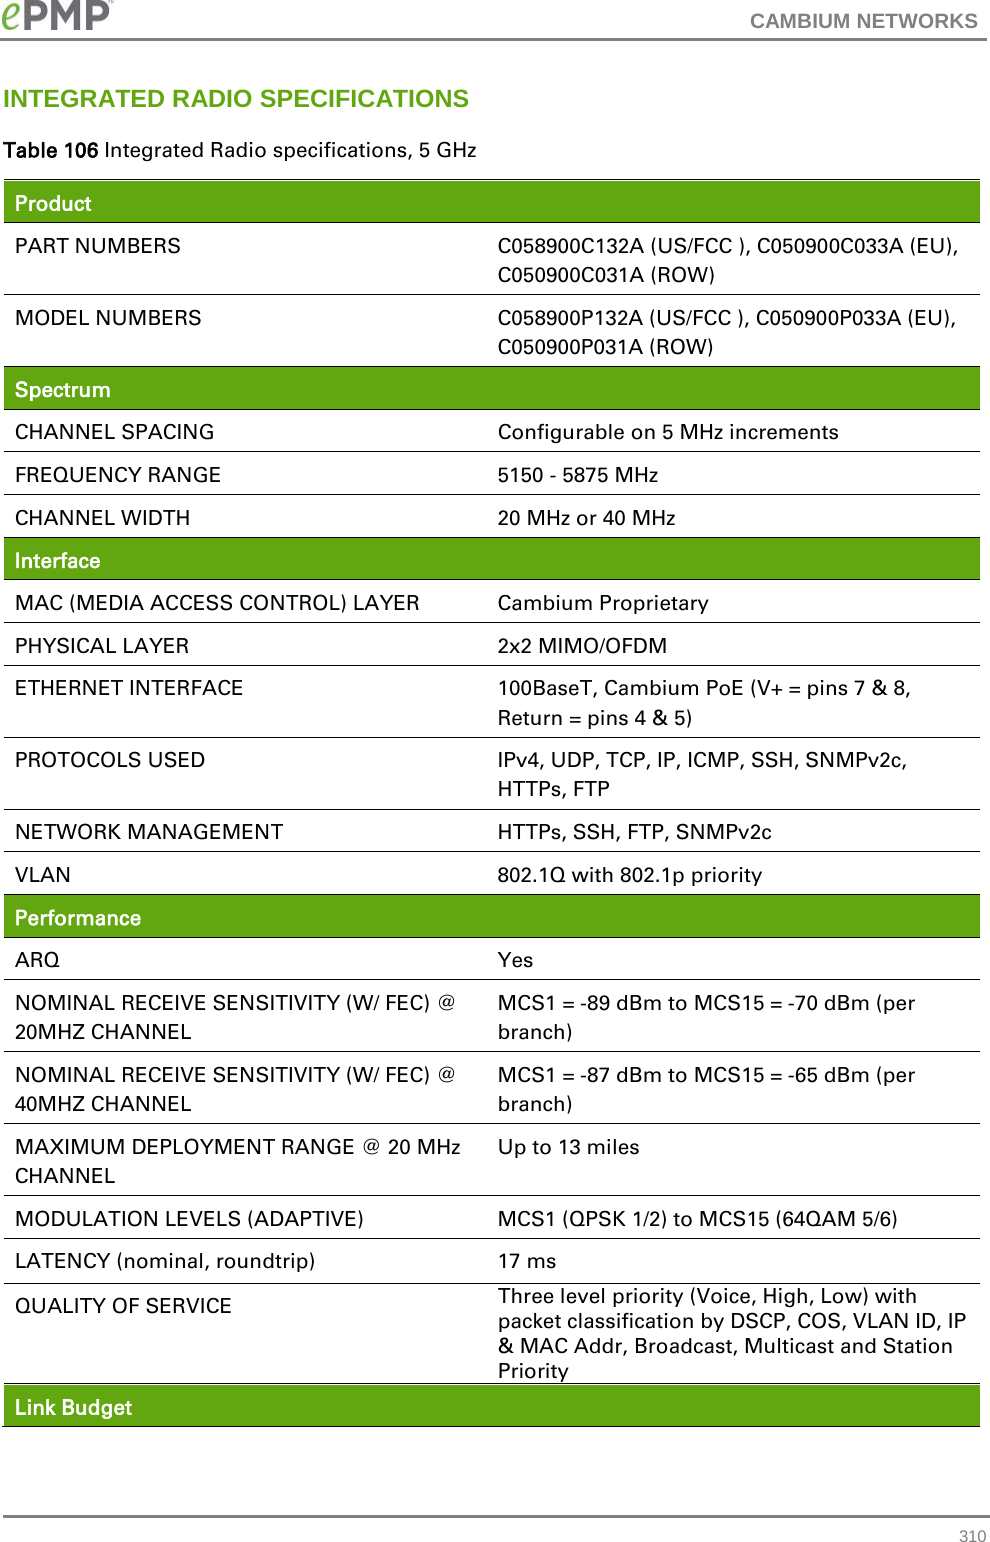 CAMBIUM NETWORKS  INTEGRATED RADIO SPECIFICATIONS Table 106 Integrated Radio specifications, 5 GHz Product  PART NUMBERS  C058900C132A (US/FCC ), C050900C033A (EU), C050900C031A (ROW) MODEL NUMBERS  C058900P132A (US/FCC ), C050900P033A (EU), C050900P031A (ROW) Spectrum  CHANNEL SPACING Configurable on 5 MHz increments FREQUENCY RANGE 5150 - 5875 MHz CHANNEL WIDTH 20 MHz or 40 MHz Interface  MAC (MEDIA ACCESS CONTROL) LAYER Cambium Proprietary PHYSICAL LAYER 2x2 MIMO/OFDM ETHERNET INTERFACE 100BaseT, Cambium PoE (V+ = pins 7 &amp; 8, Return = pins 4 &amp; 5) PROTOCOLS USED IPv4, UDP, TCP, IP, ICMP, SSH, SNMPv2c, HTTPs, FTP NETWORK MANAGEMENT HTTPs, SSH, FTP, SNMPv2c VLAN 802.1Q with 802.1p priority Performance  ARQ Yes NOMINAL RECEIVE SENSITIVITY (W/ FEC) @ 20MHZ CHANNEL MCS1 = -89 dBm to MCS15 = -70 dBm (per branch) NOMINAL RECEIVE SENSITIVITY (W/ FEC) @ 40MHZ CHANNEL MCS1 = -87 dBm to MCS15 = -65 dBm (per branch) MAXIMUM DEPLOYMENT RANGE @ 20 MHz CHANNEL Up to 13 miles MODULATION LEVELS (ADAPTIVE) MCS1 (QPSK 1/2) to MCS15 (64QAM 5/6) LATENCY (nominal, roundtrip) 17 ms QUALITY OF SERVICE Three level priority (Voice, High, Low) with packet classification by DSCP, COS, VLAN ID, IP &amp; MAC Addr, Broadcast, Multicast and Station Priority Link Budget   310 